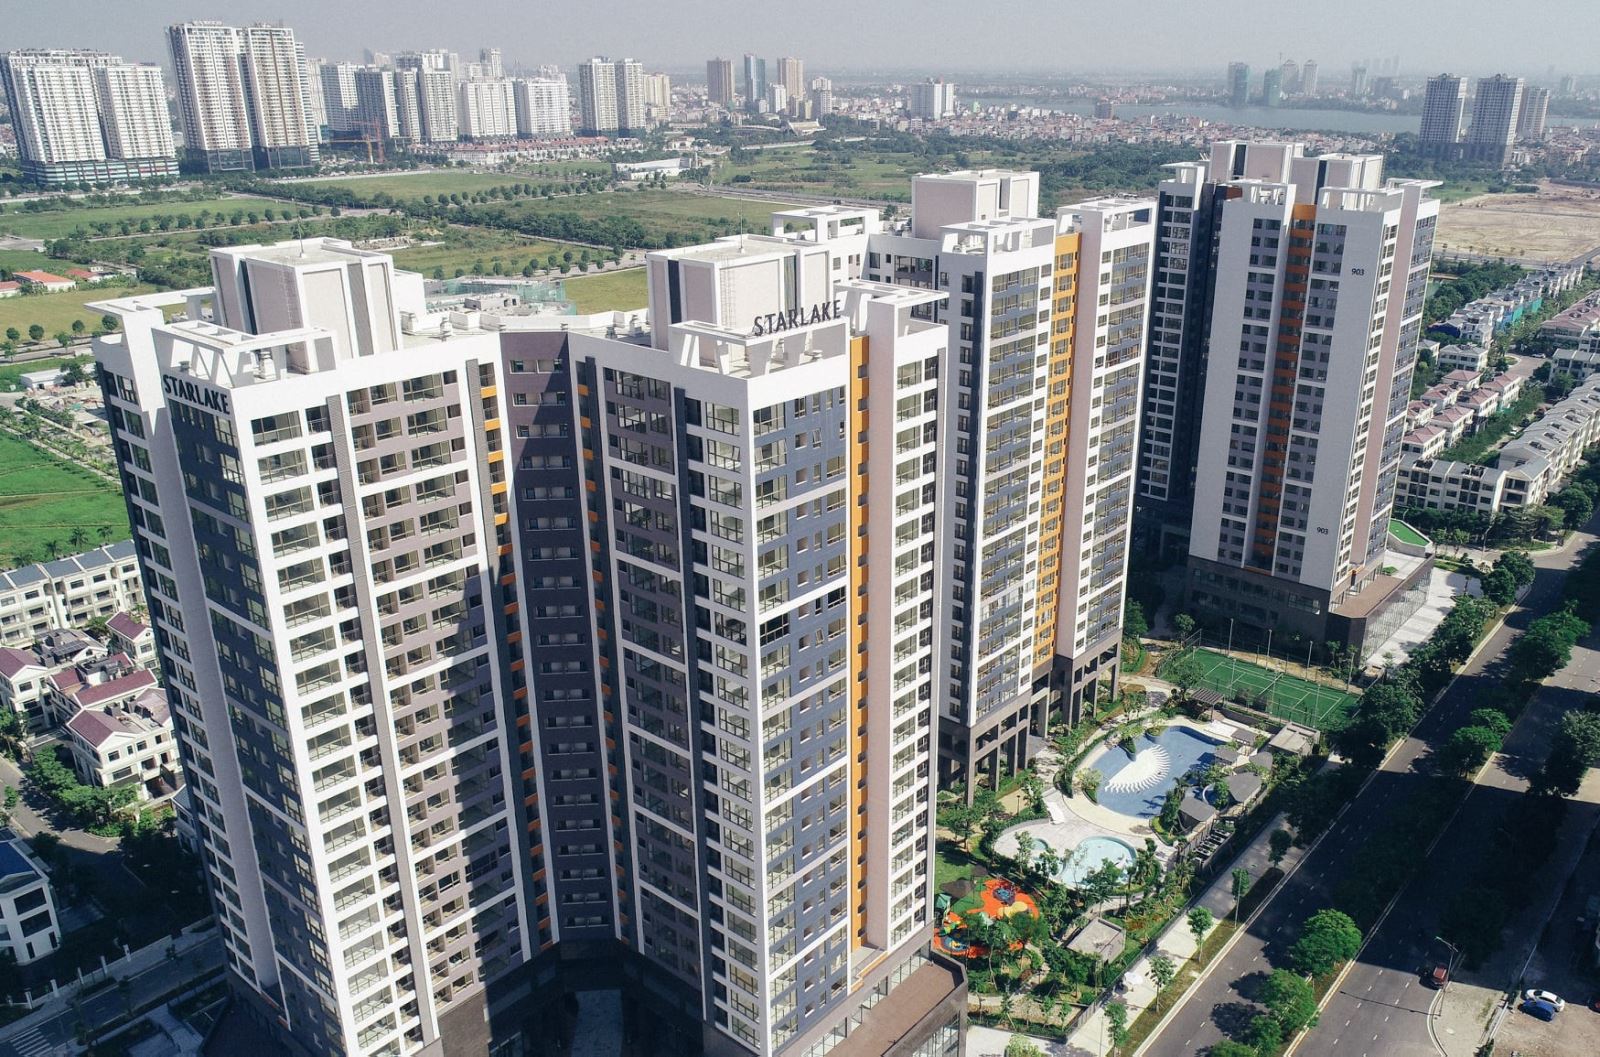 Penthouses for sale in Starlake Urban Area